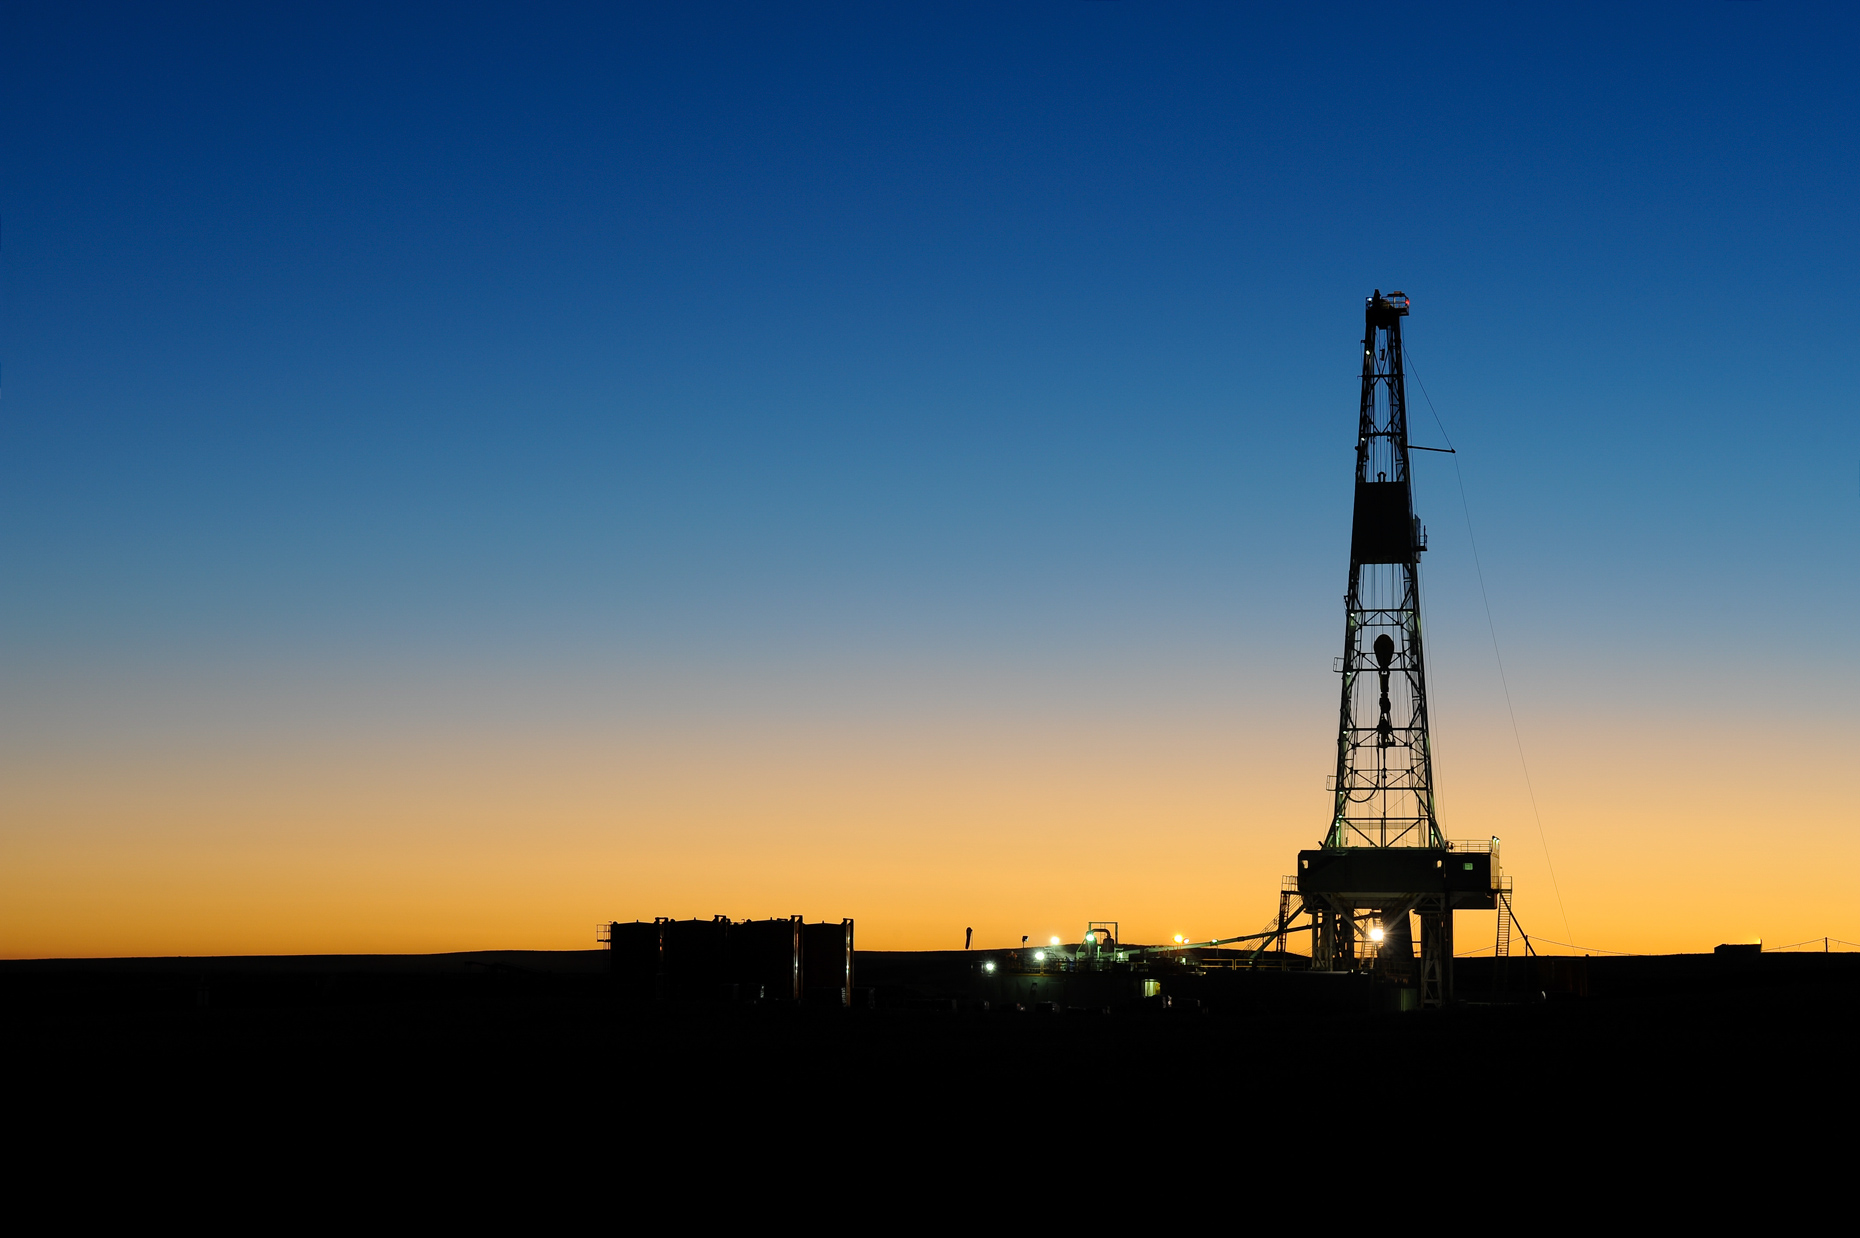 North Dakota oil rig photographed by Kevin Brown